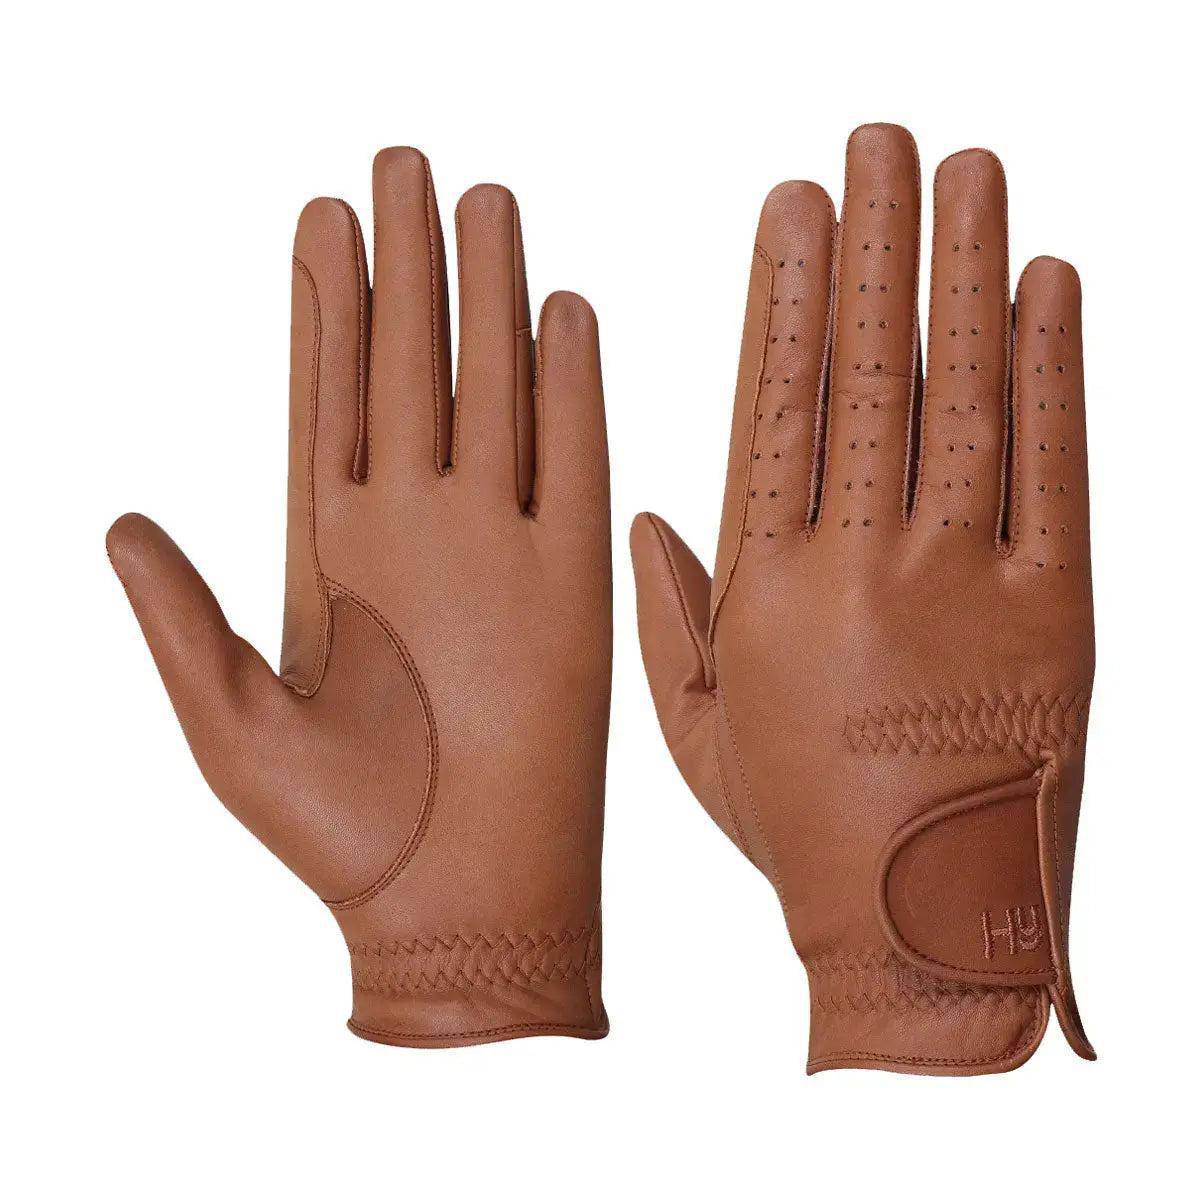 Hy Leather Childs Riding Gloves Light Brown Small HY Equestrian Riding Gloves Barnstaple Equestrian Supplies